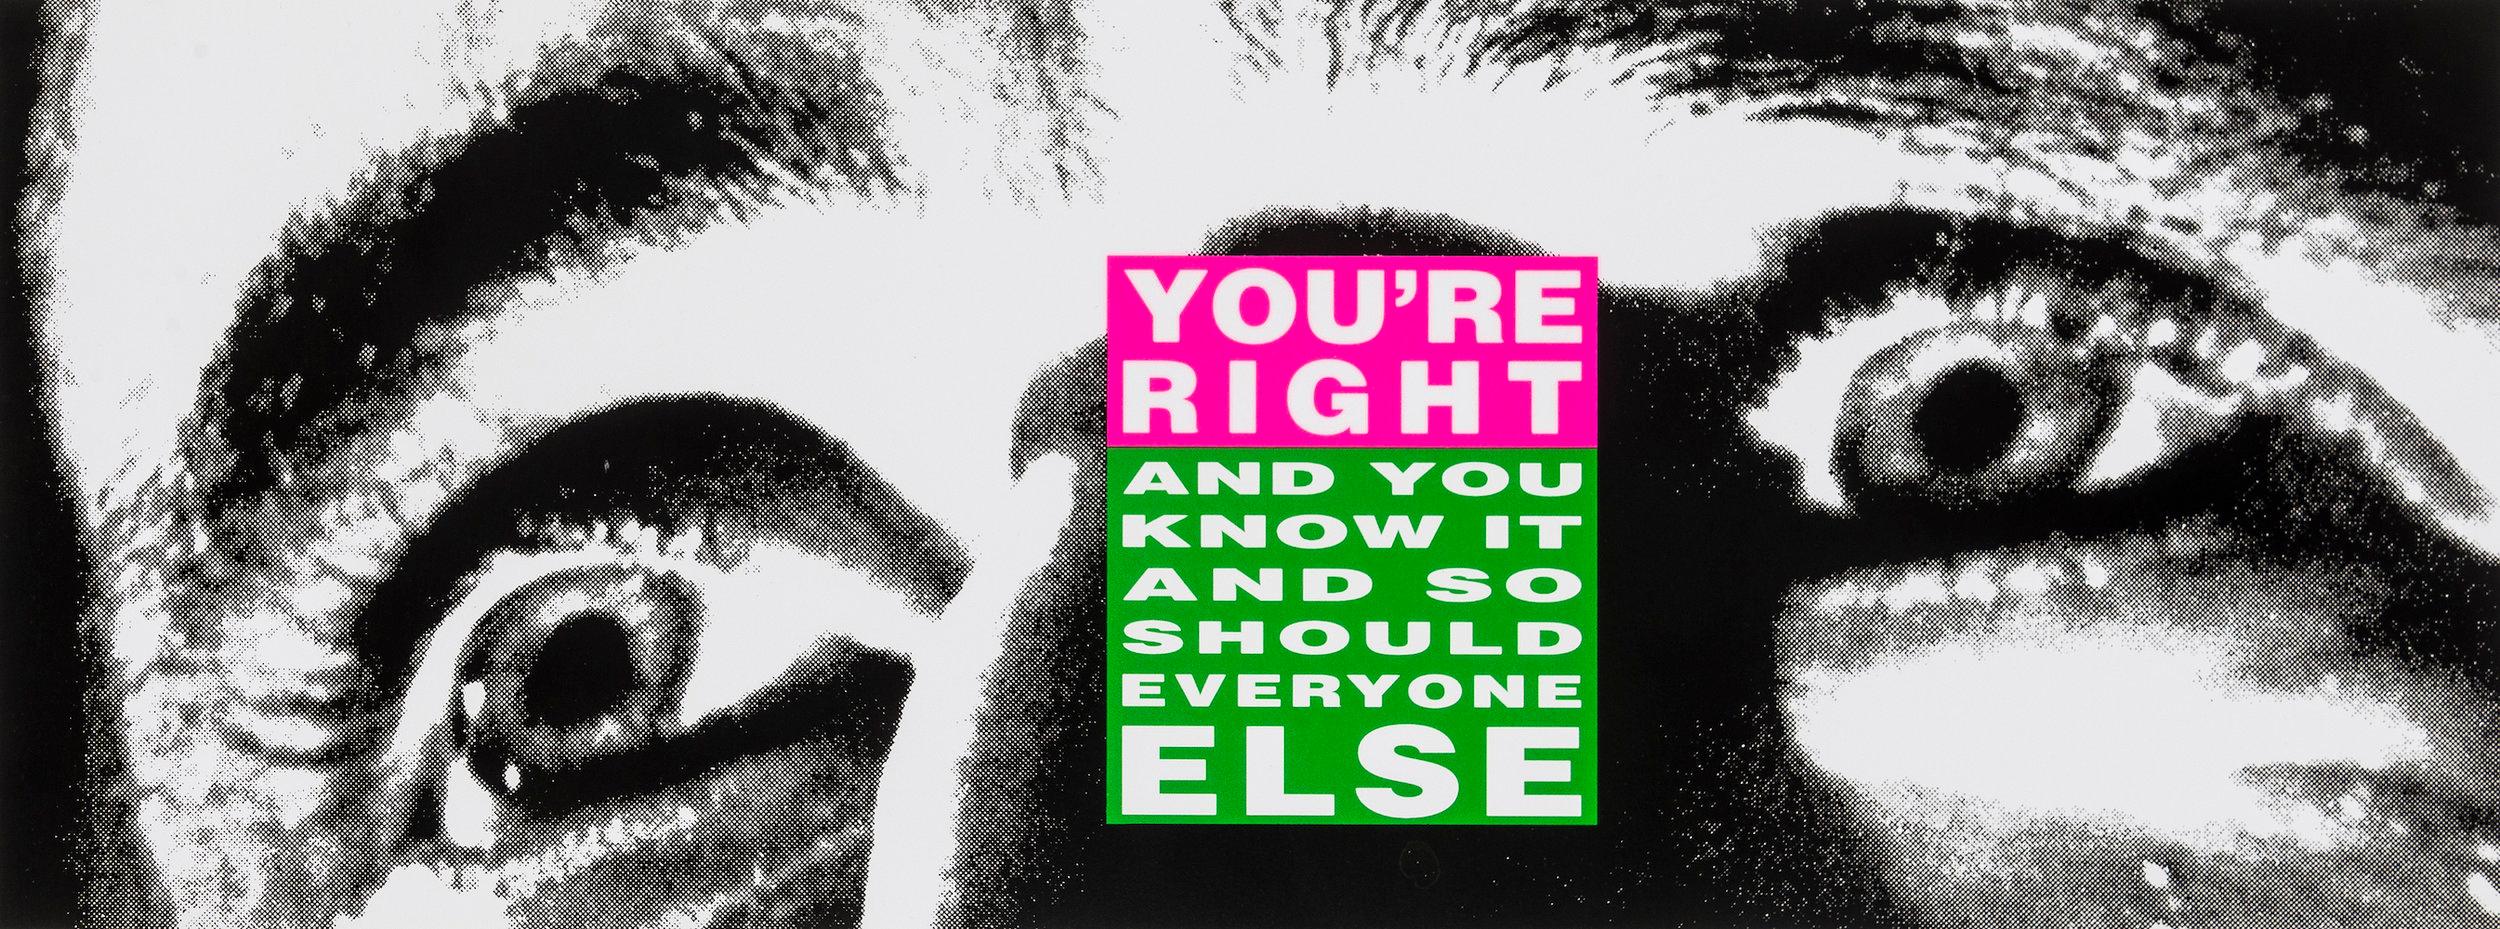 BARBARA KRUGER 
You're right ( And you know it and so should everyone else), 2010

Lithograph in colours, on wove
Signed, dated and numbered from the edition of 200 verso
Published by the Editions and Artists Books Fair, New York
Sheet: 22.5 x 61.0